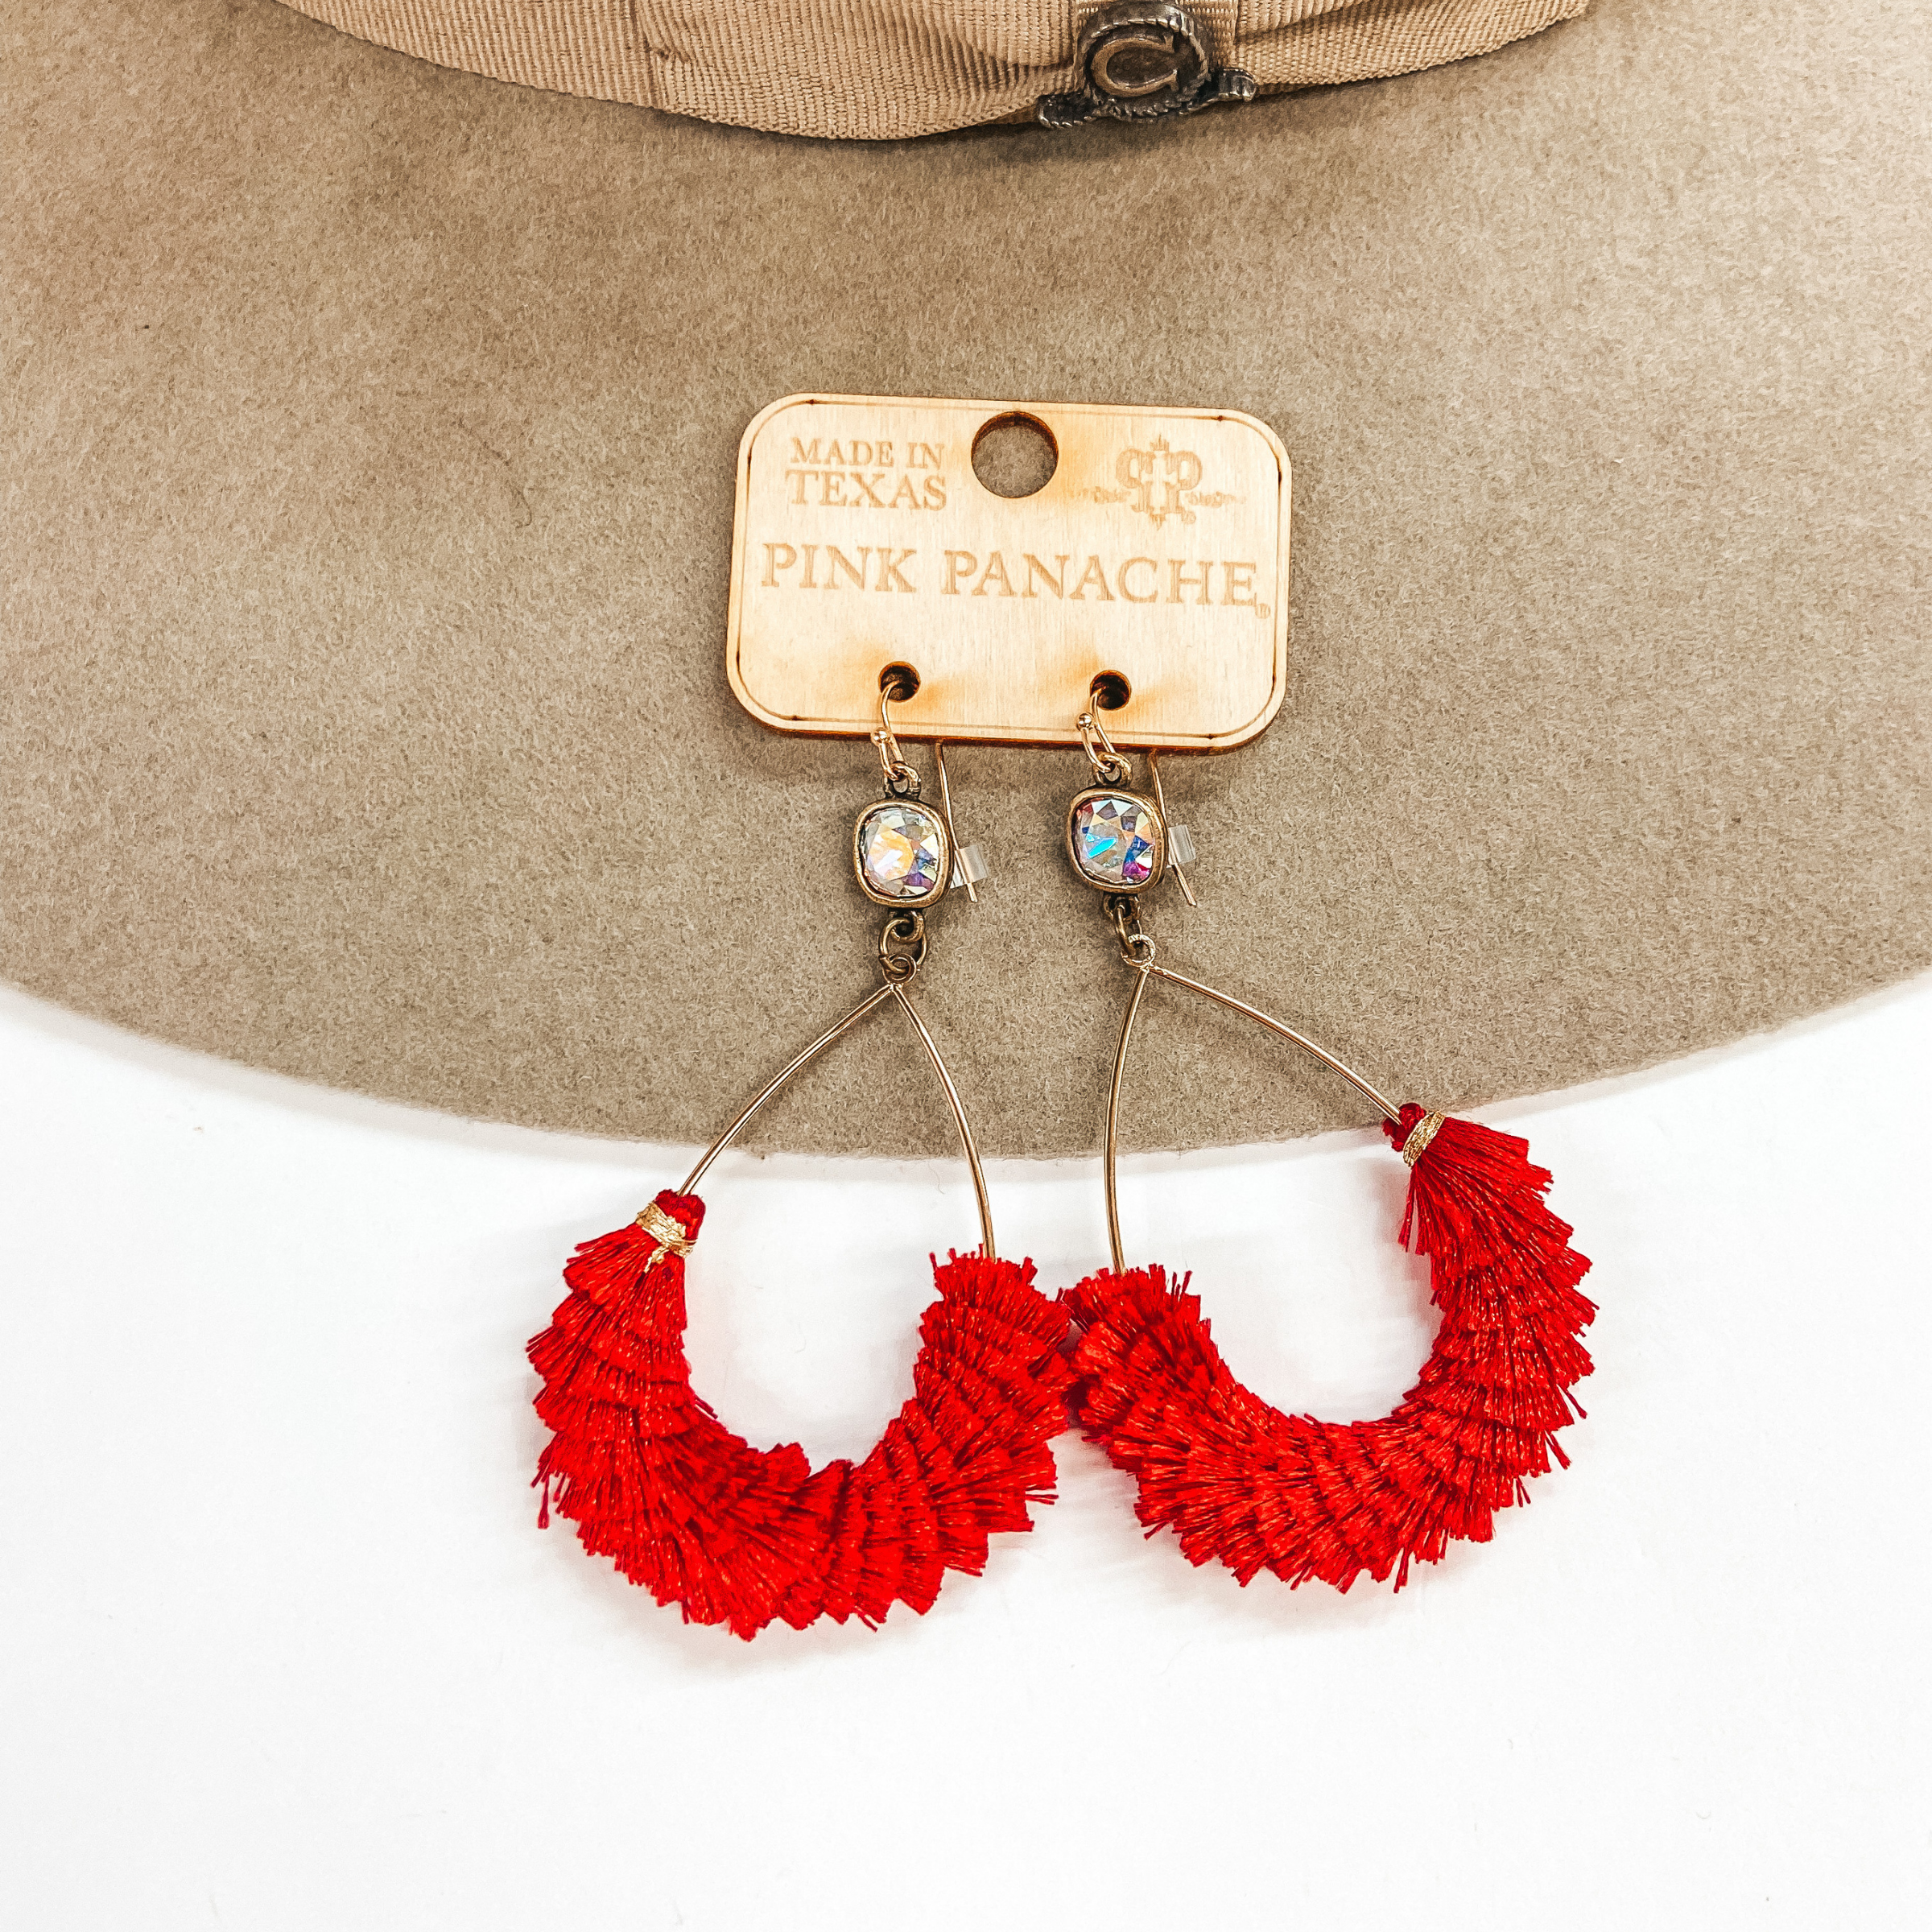 A pair of gold teardrop earrings with an AB cushion cut crystal and red fringe detailing. Pictured on white background with a beige hat.